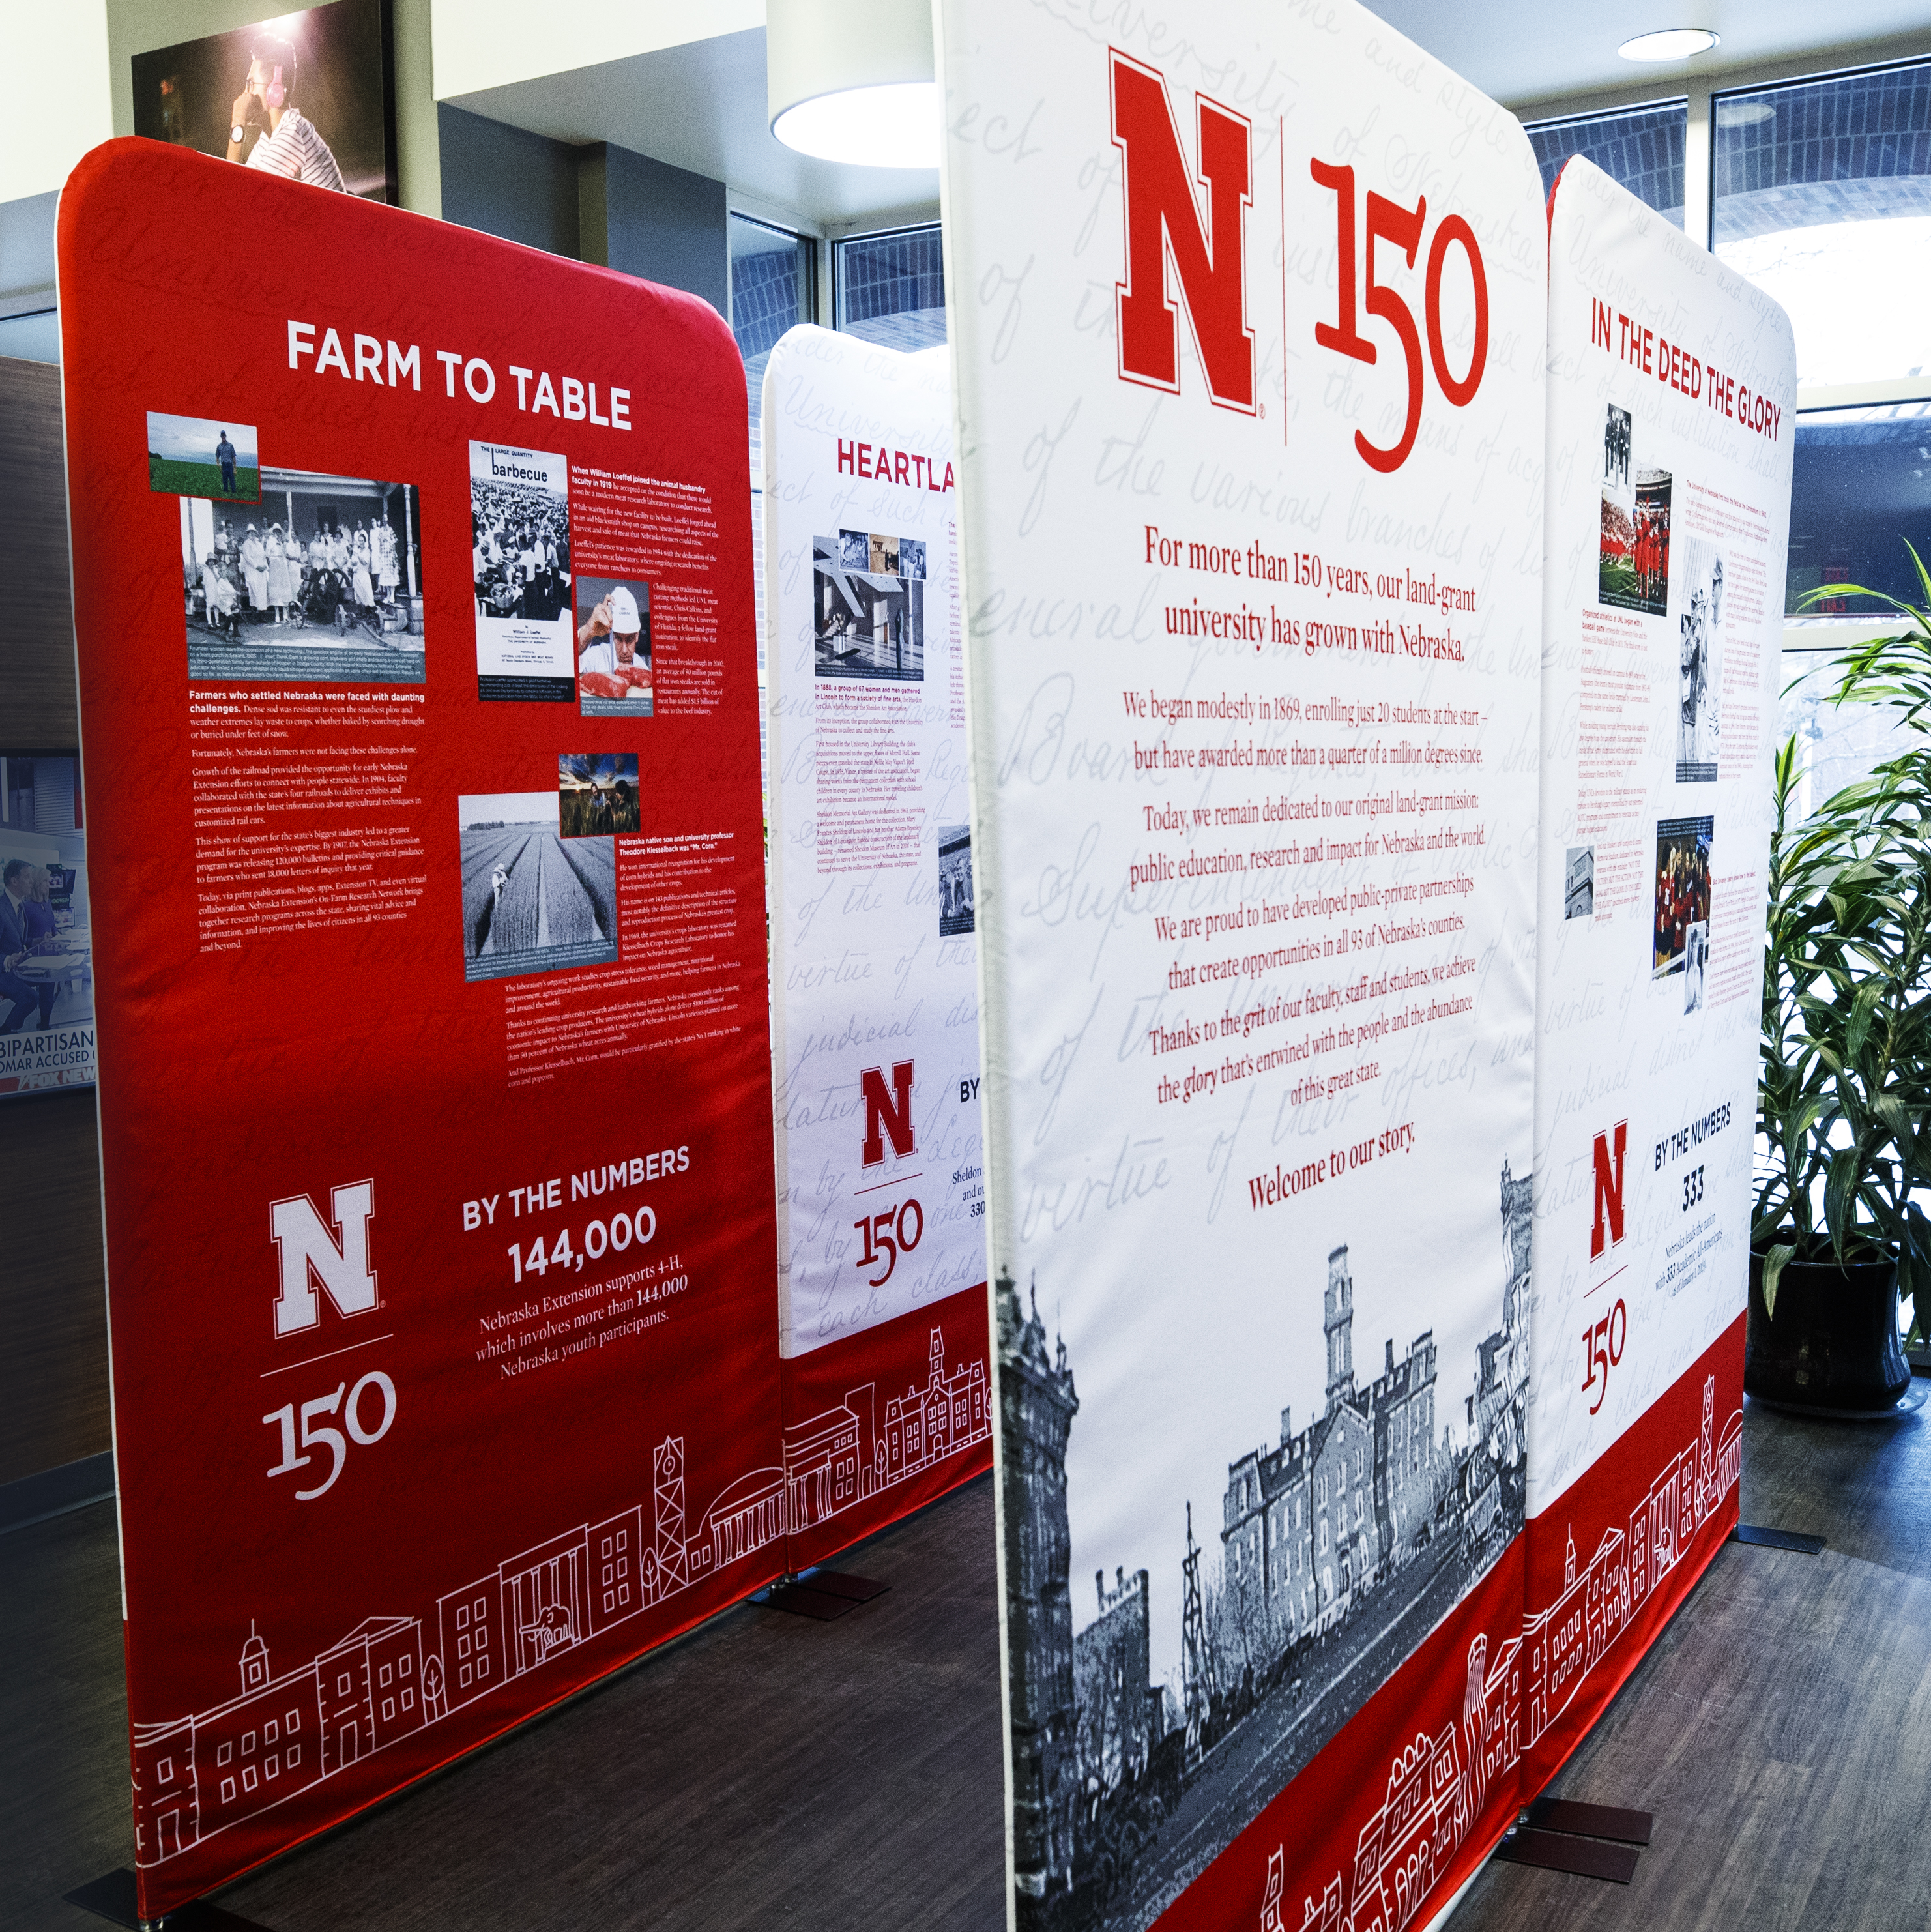 The N150 traveling exhibition was designed with assistance from a freelance artist and funded through donor contributions. It will shift to the State Capitol from Feb. 19 to March 14 before making a stop in O'Neill.